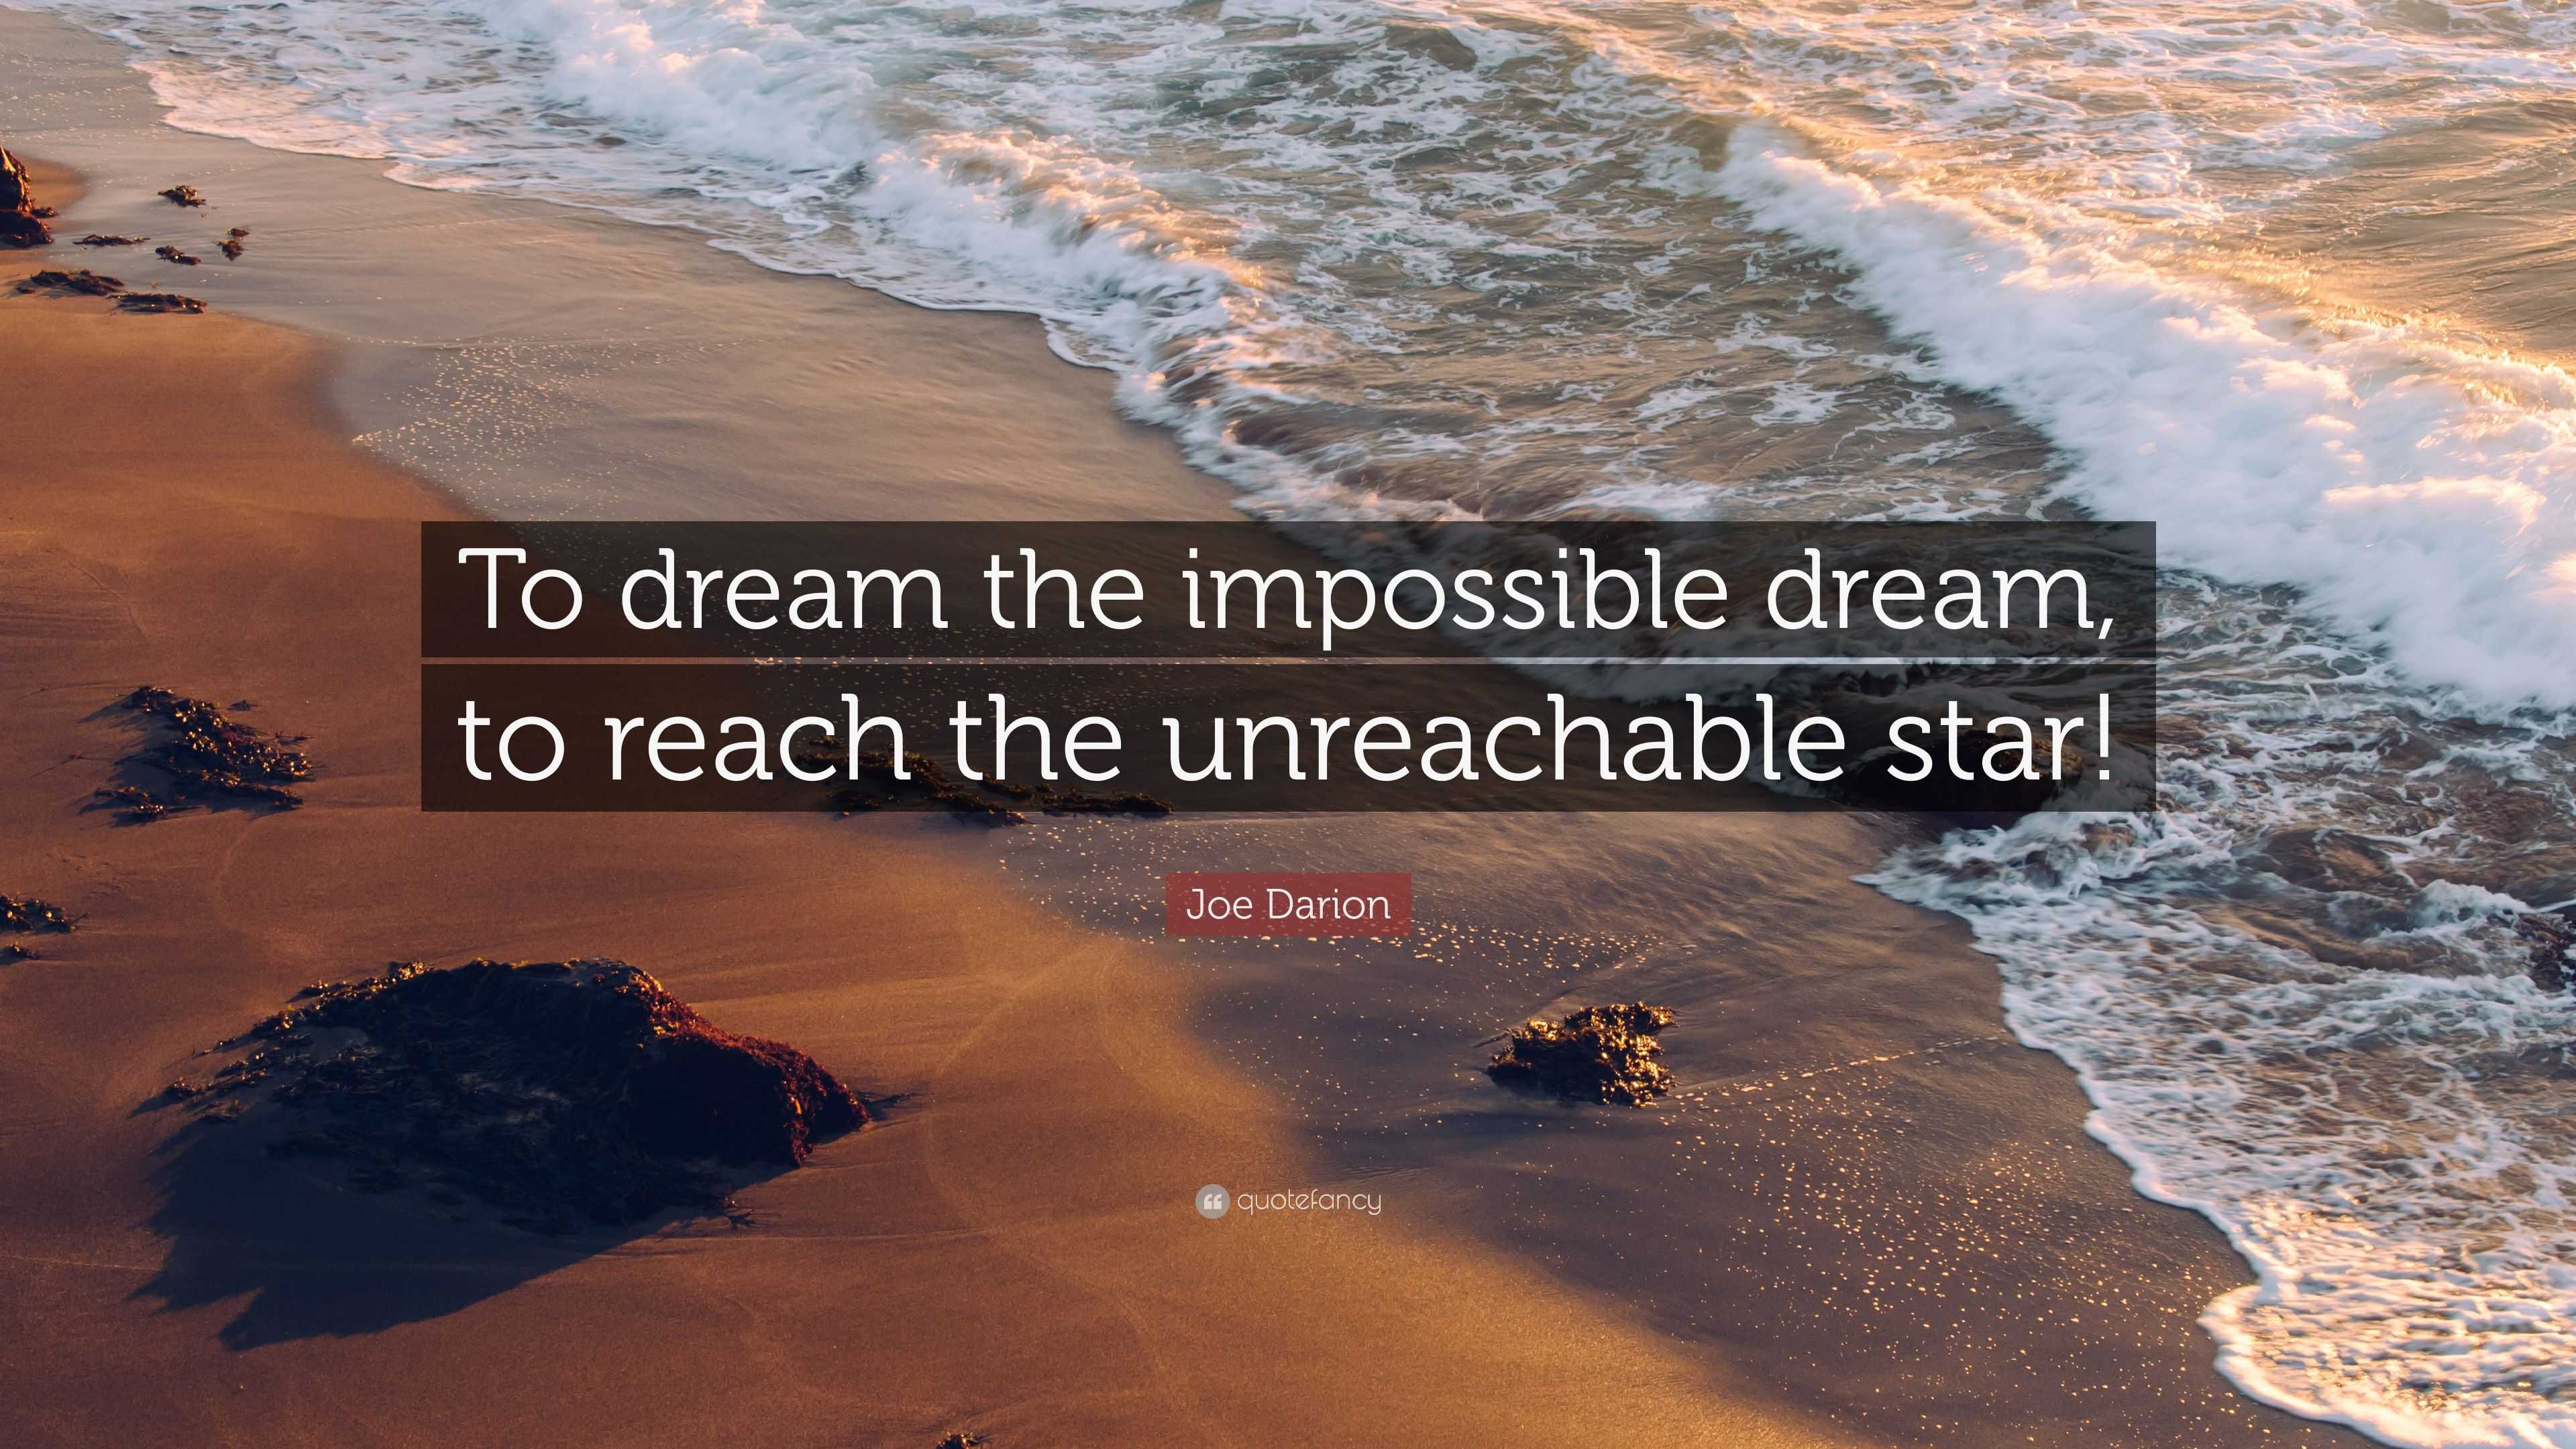 Joe Darion Quote “To dream the impossible dream, to reach the